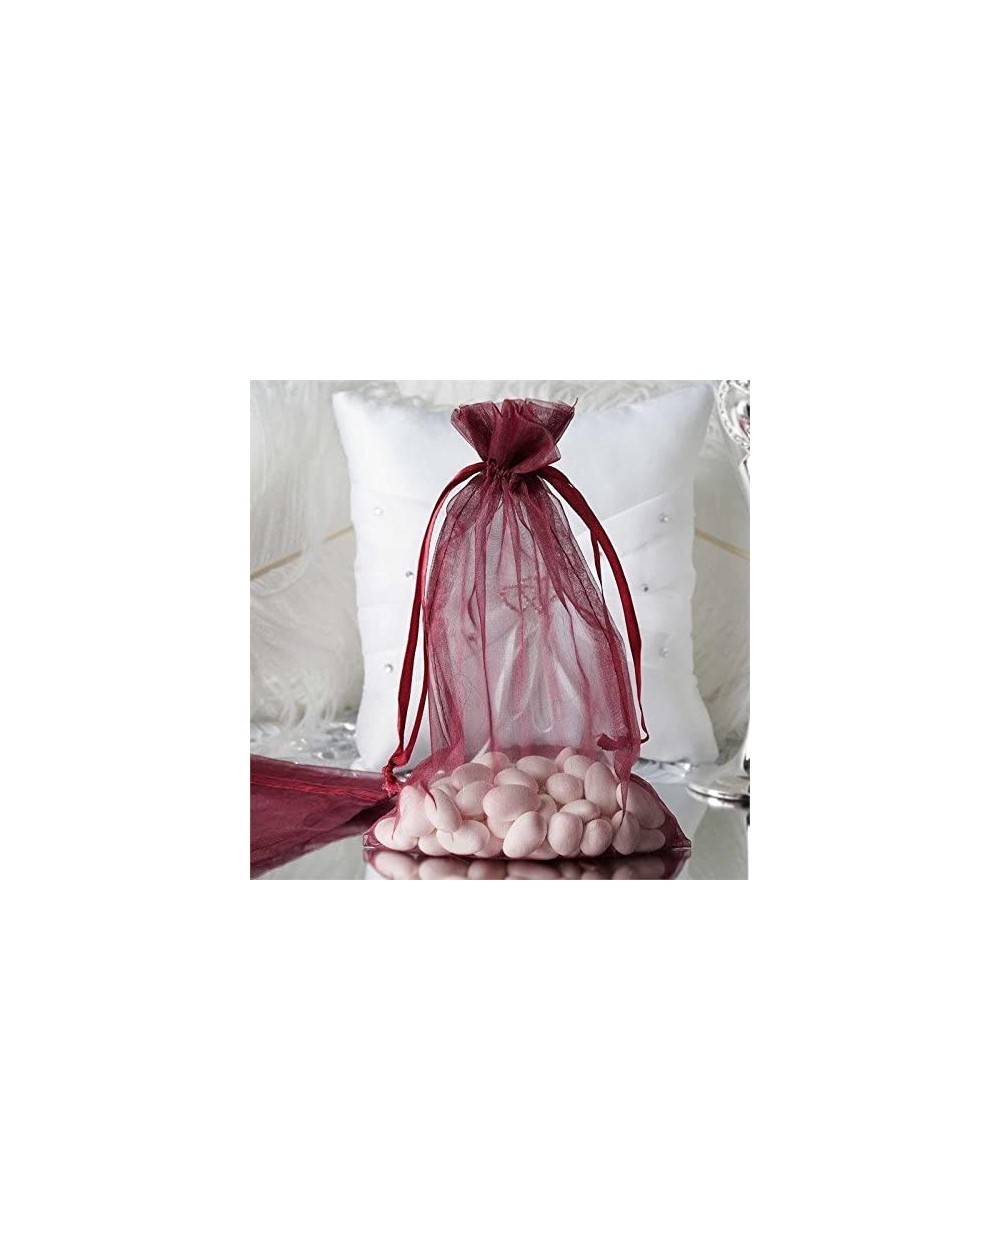 Favors 60 pcs 6x9 inch Burgundy Organza Favor Bags - Wedding Party Favors Jewelry Pouch Candy Gift Small Bags - Burgundy - C2...